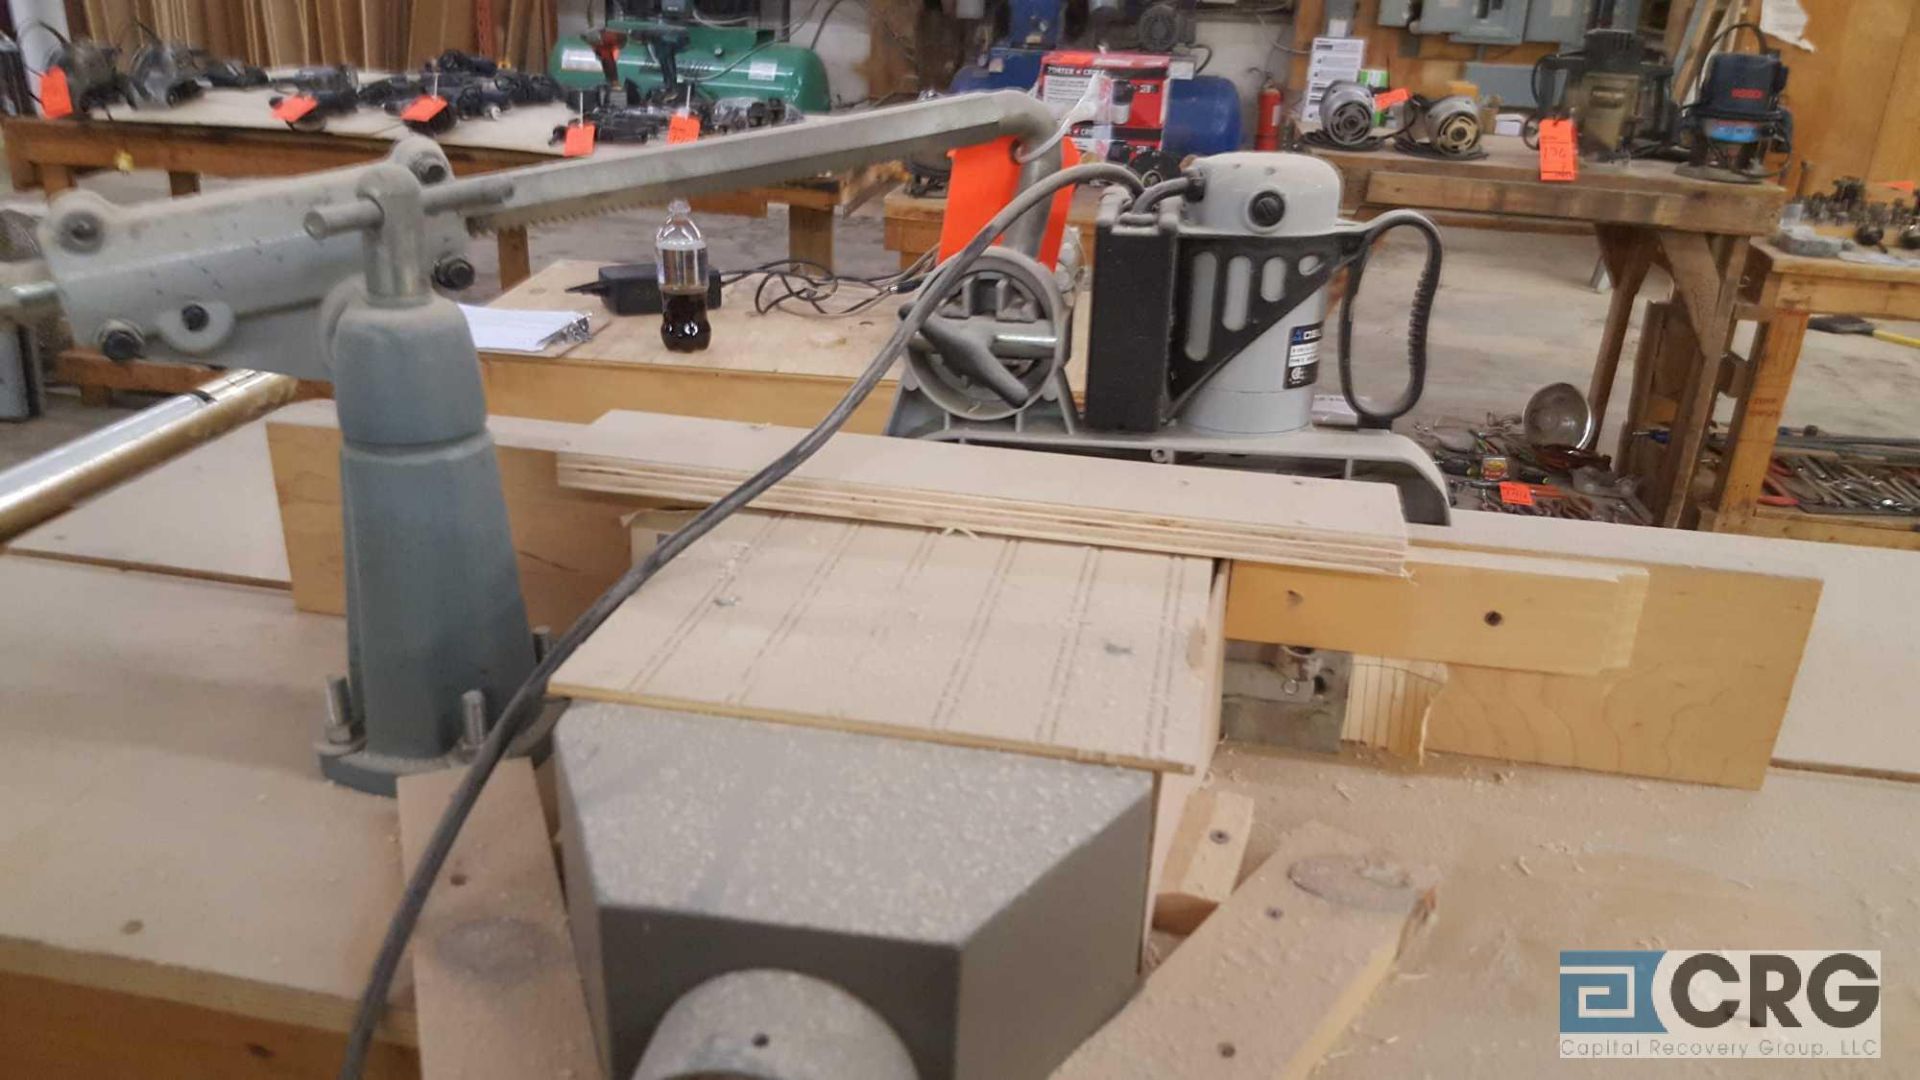 Custom-made portable router table with Porter-Cable router and Delta feeder - Image 4 of 6